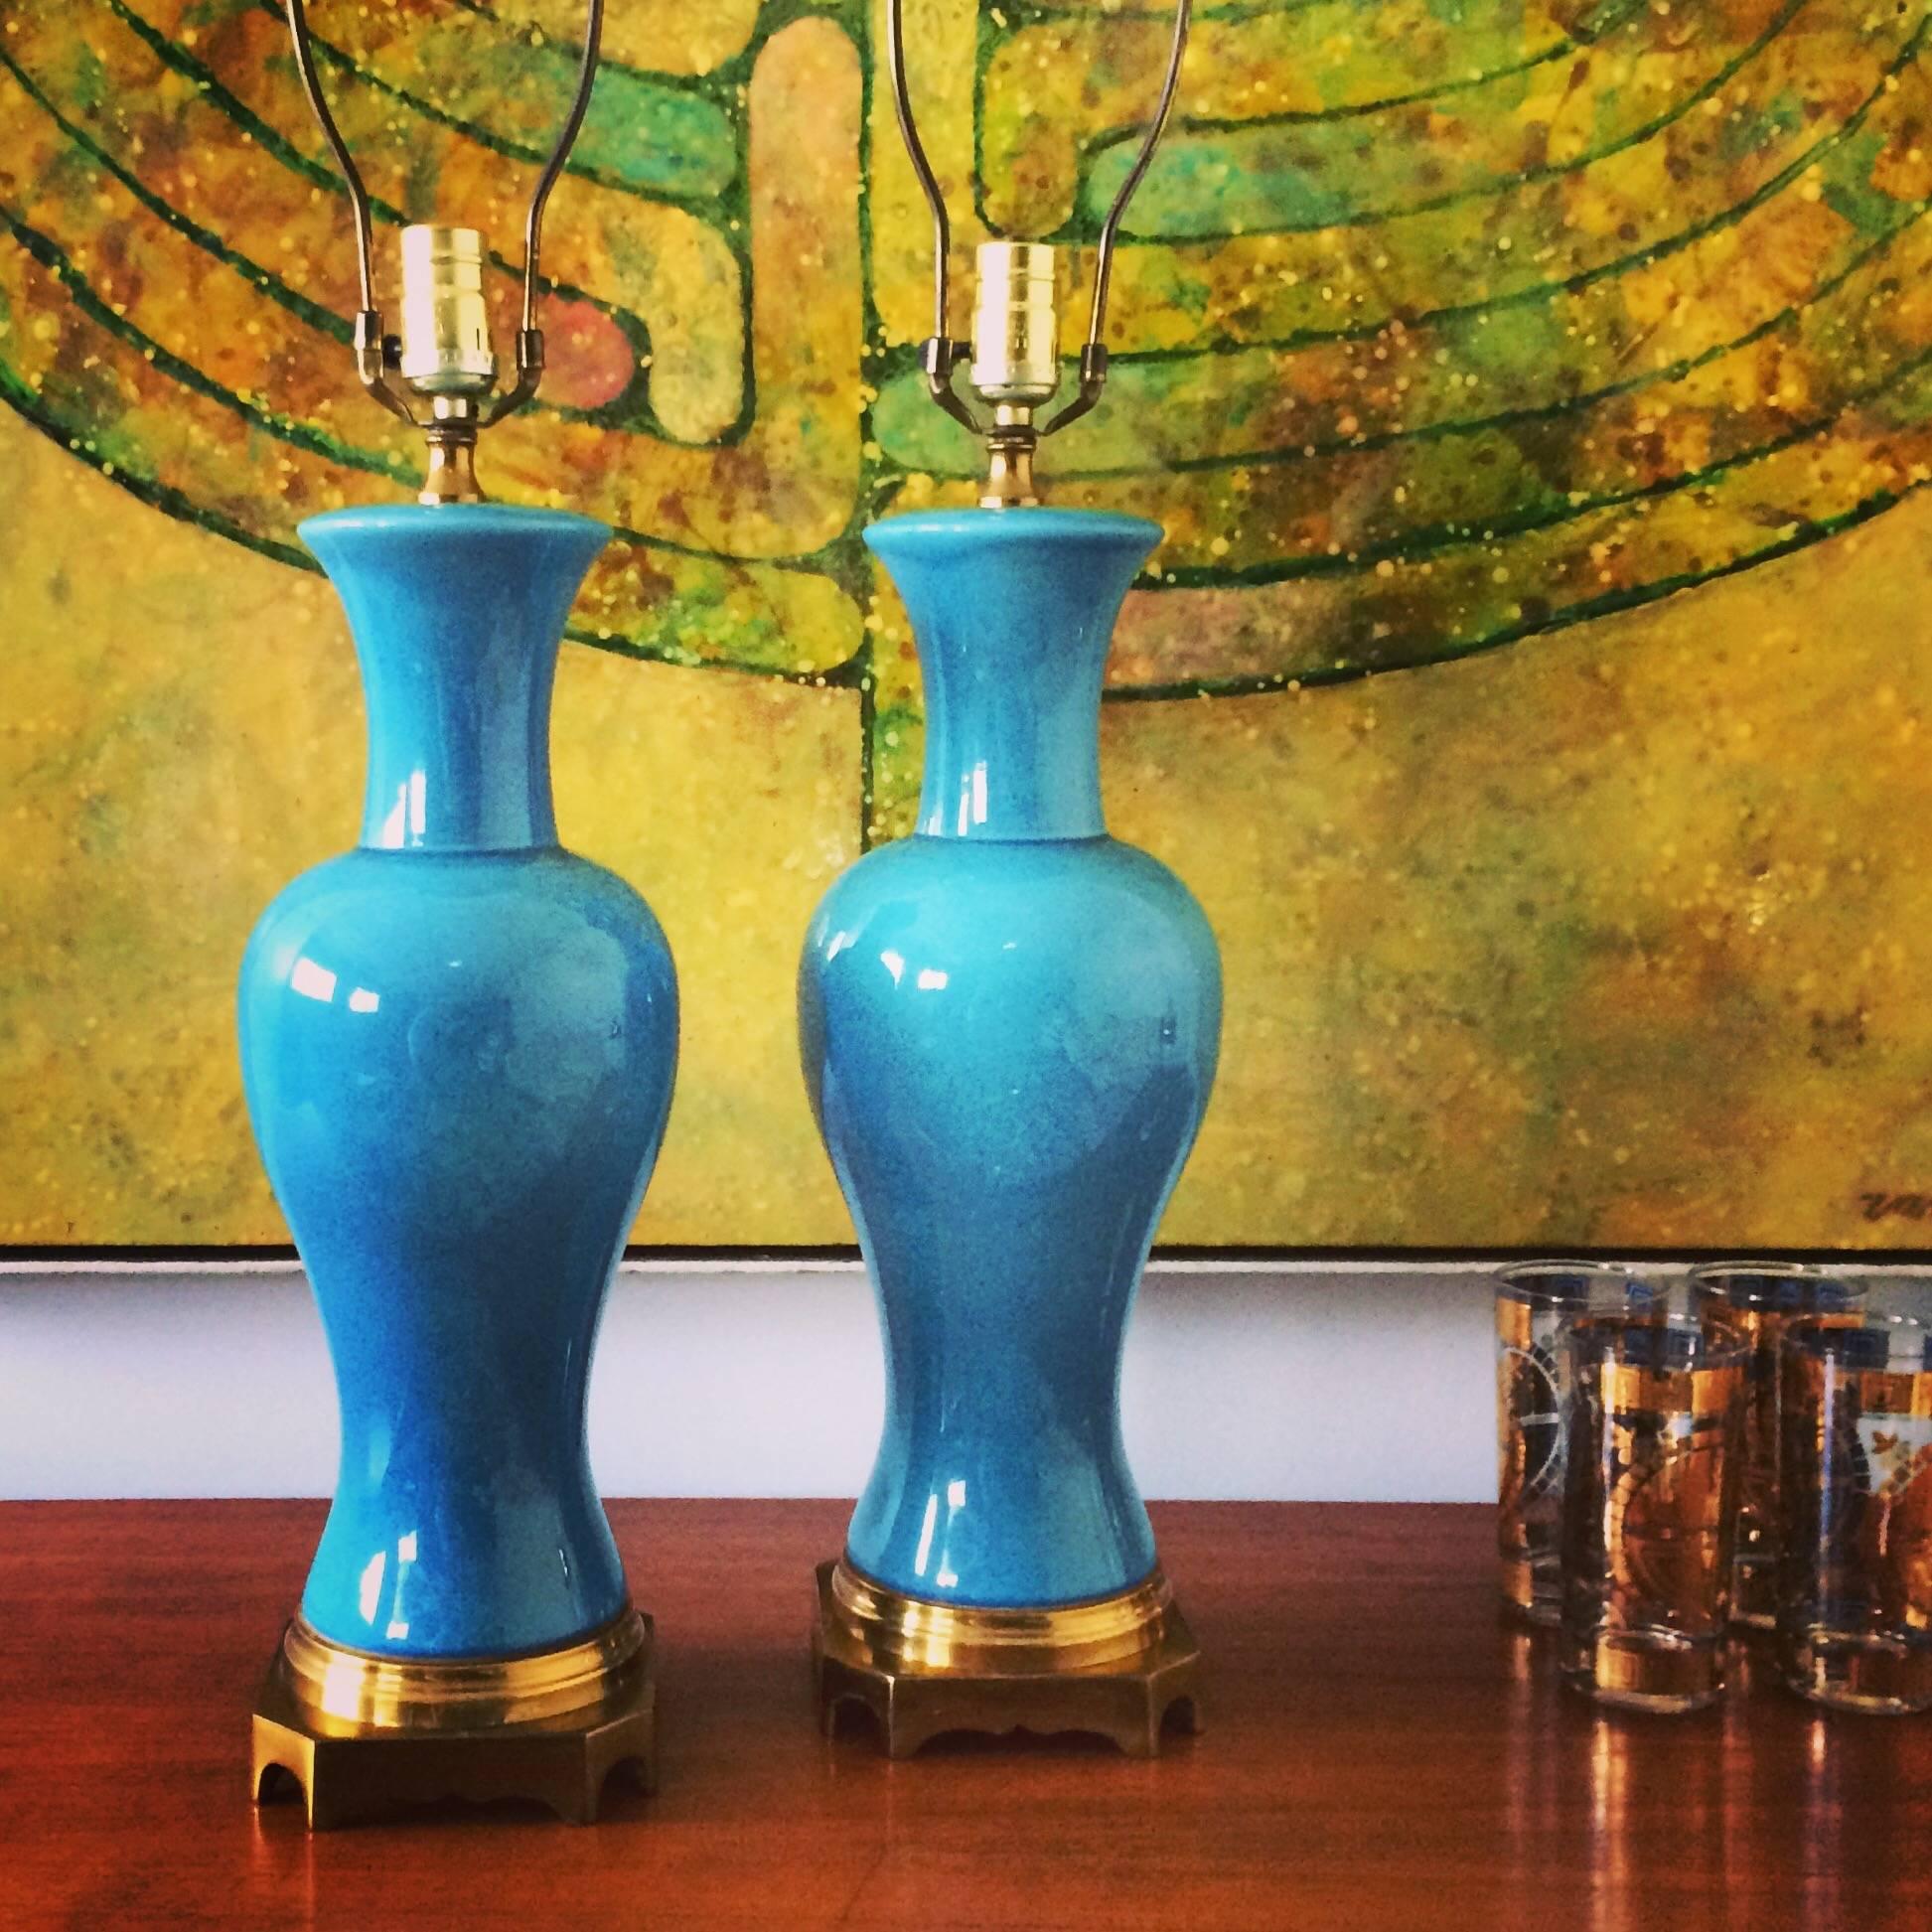 A pair of midcentury Asian style turquoise table lamps with a solid brass base. In beautiful original condition. Patinated brass base, harp and finial. Shades not included. Age appropriate wear.

Measurements: Measurements to top of receptacle 22